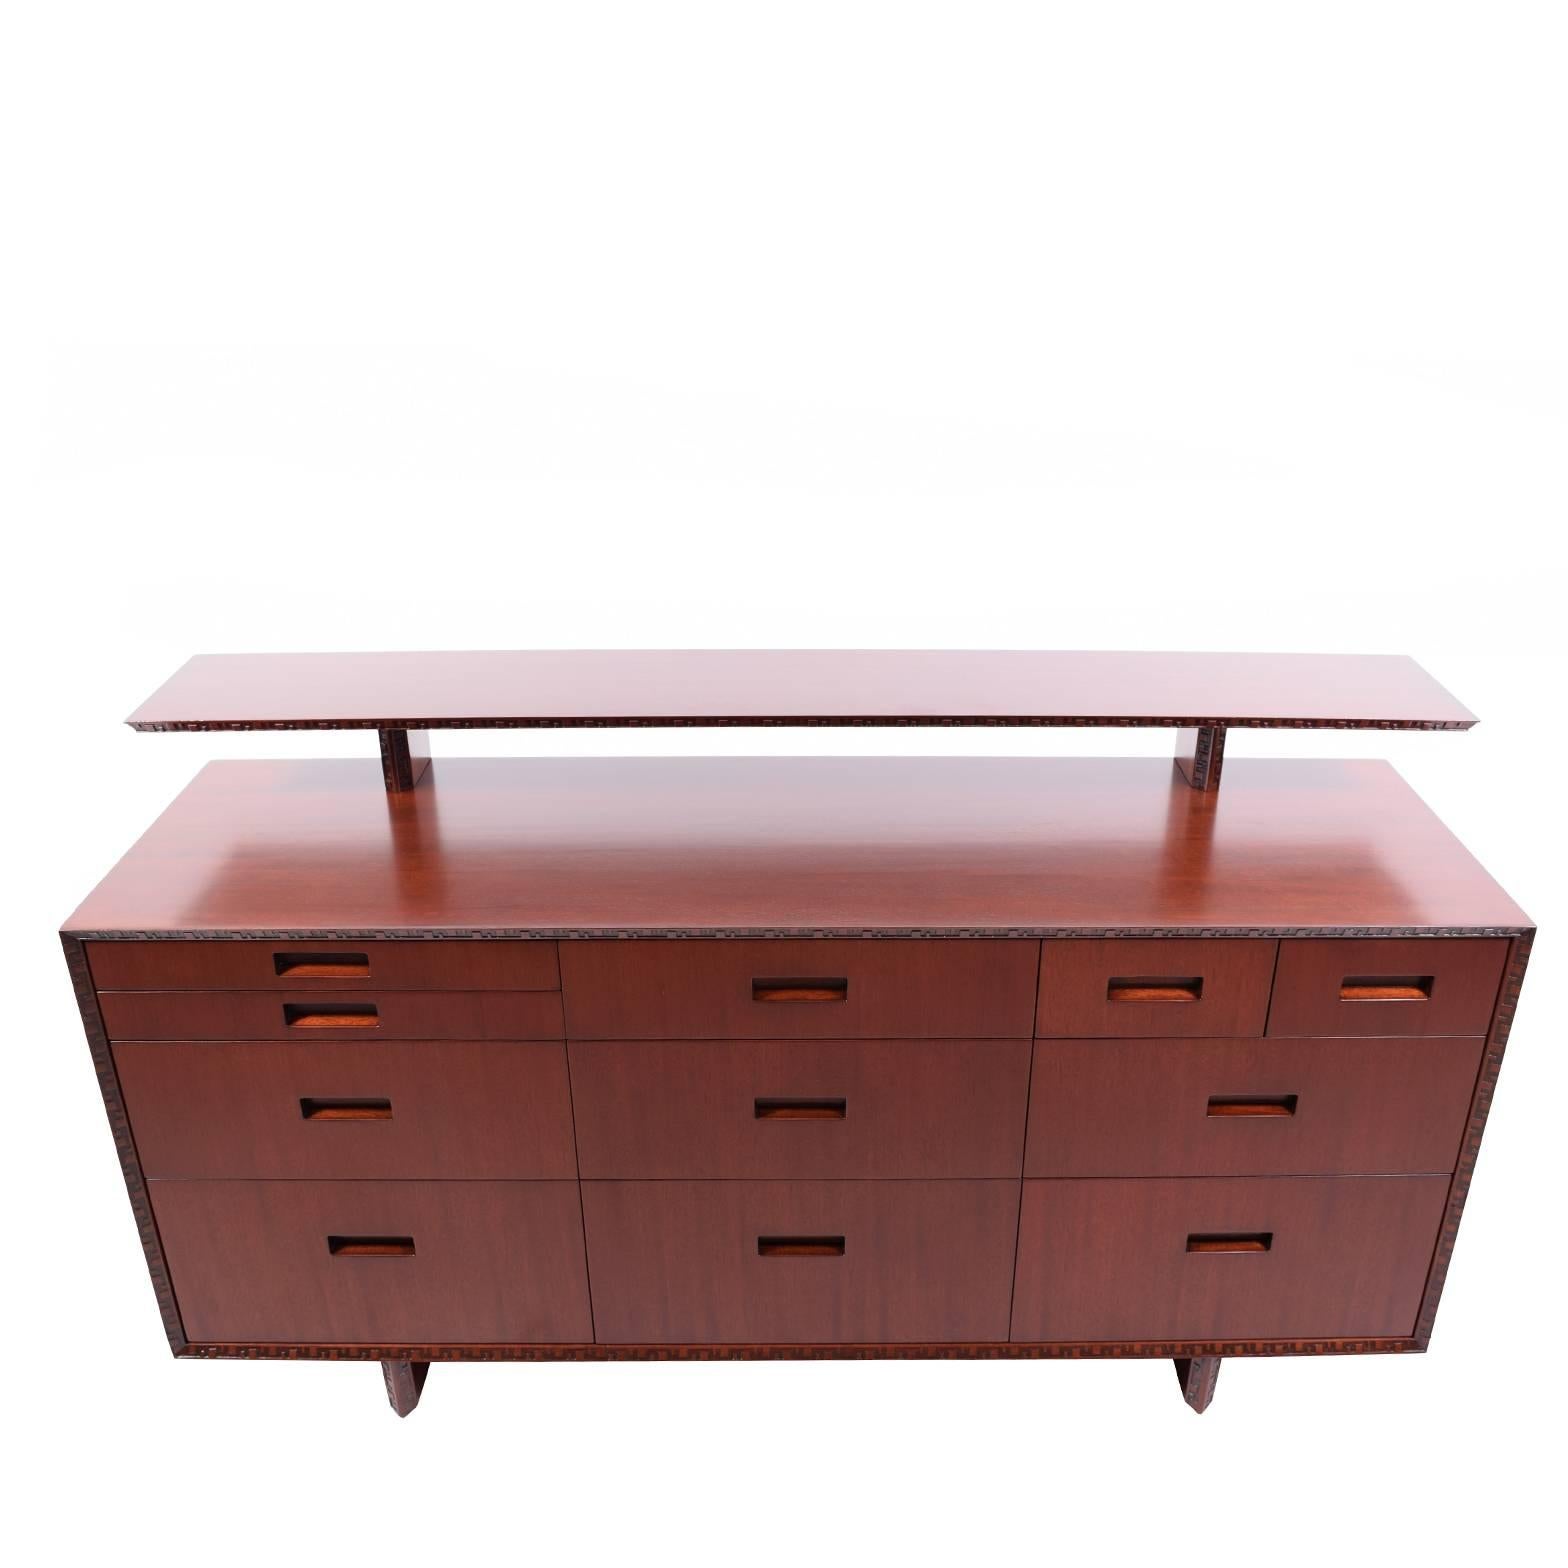 American Chest of Drawers with Shelf by Frank Lloyd Wright